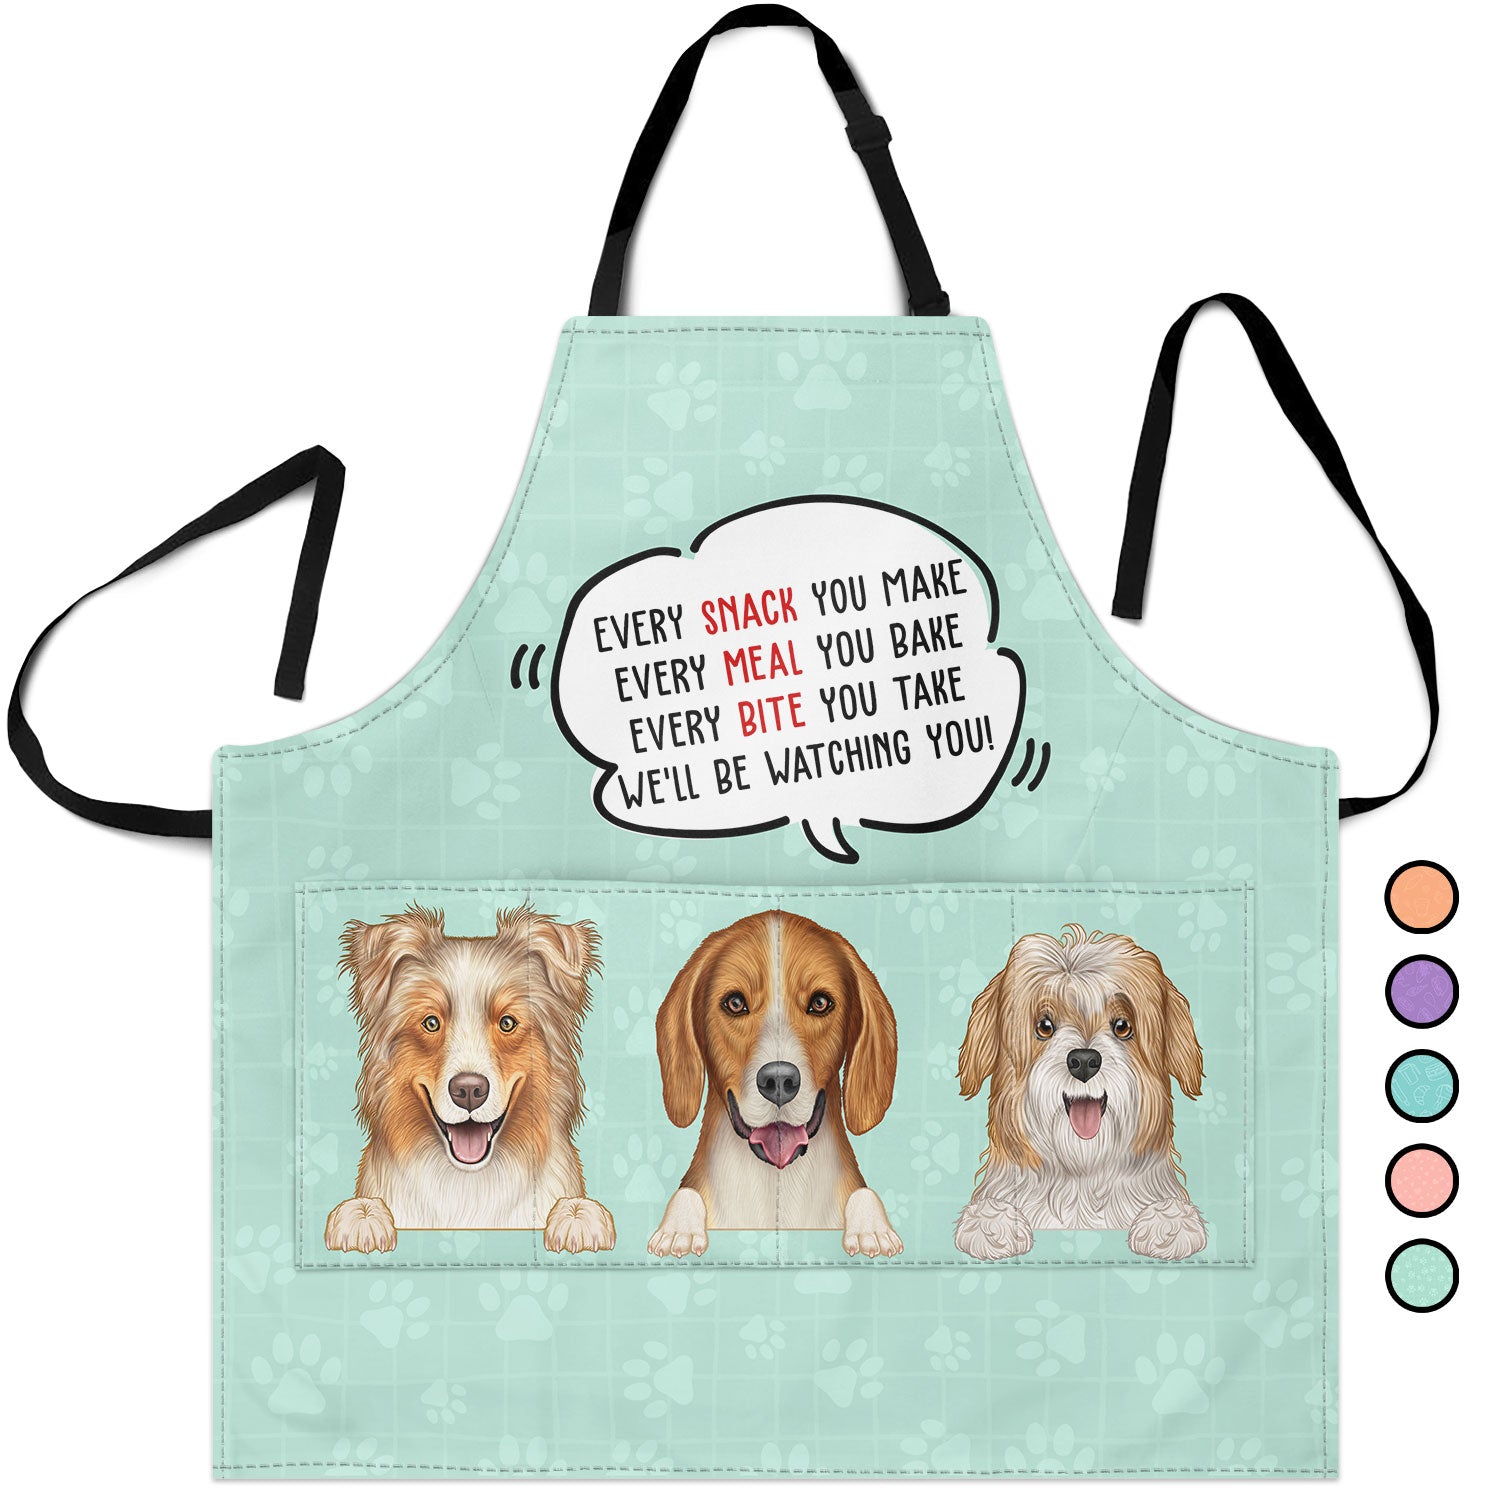 We'll Be Watching You - Birthday, Loving Gift For Dog Lovers, Dog Mom, Dog Dad - Personalized Apron